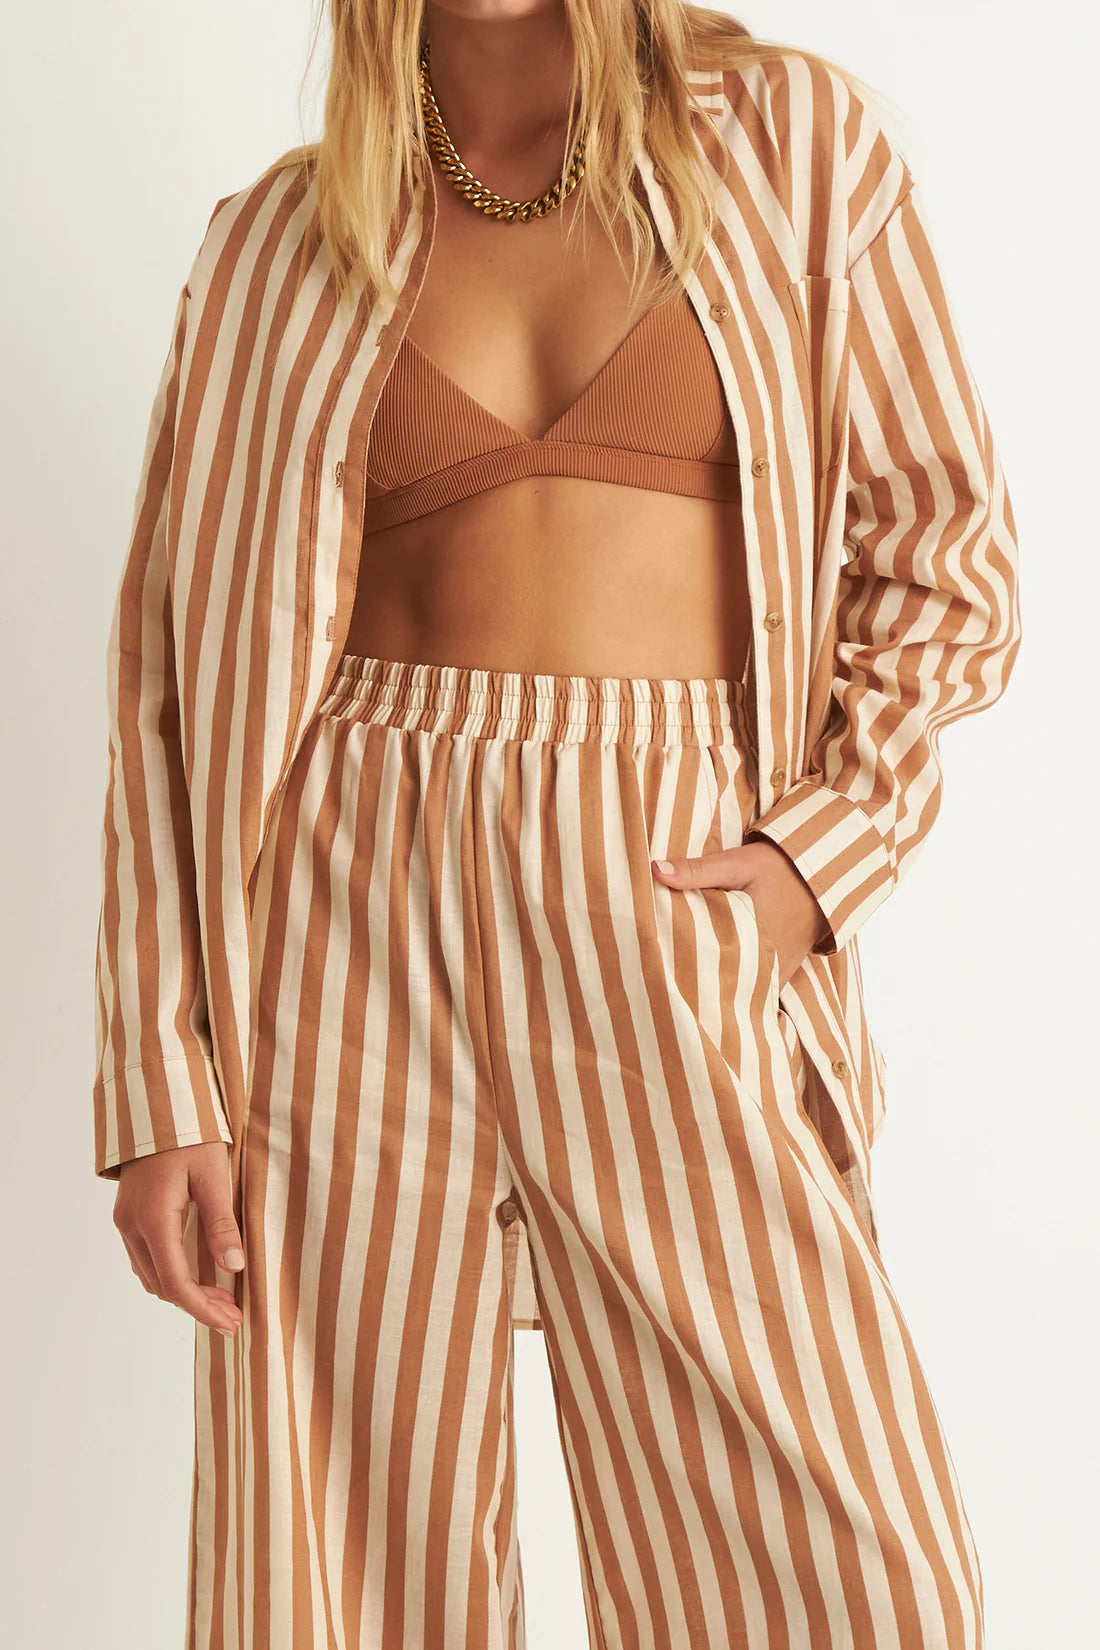 ZERAFIMA The Maple Long Sleeve Shirt is a summer linen blend shirt in tan stripe print. Features include long line silhouette, tortoise shell buttons and relaxed fit. Can also be worn as a shirt dress over swimwear. DETAILS Oversized long line 